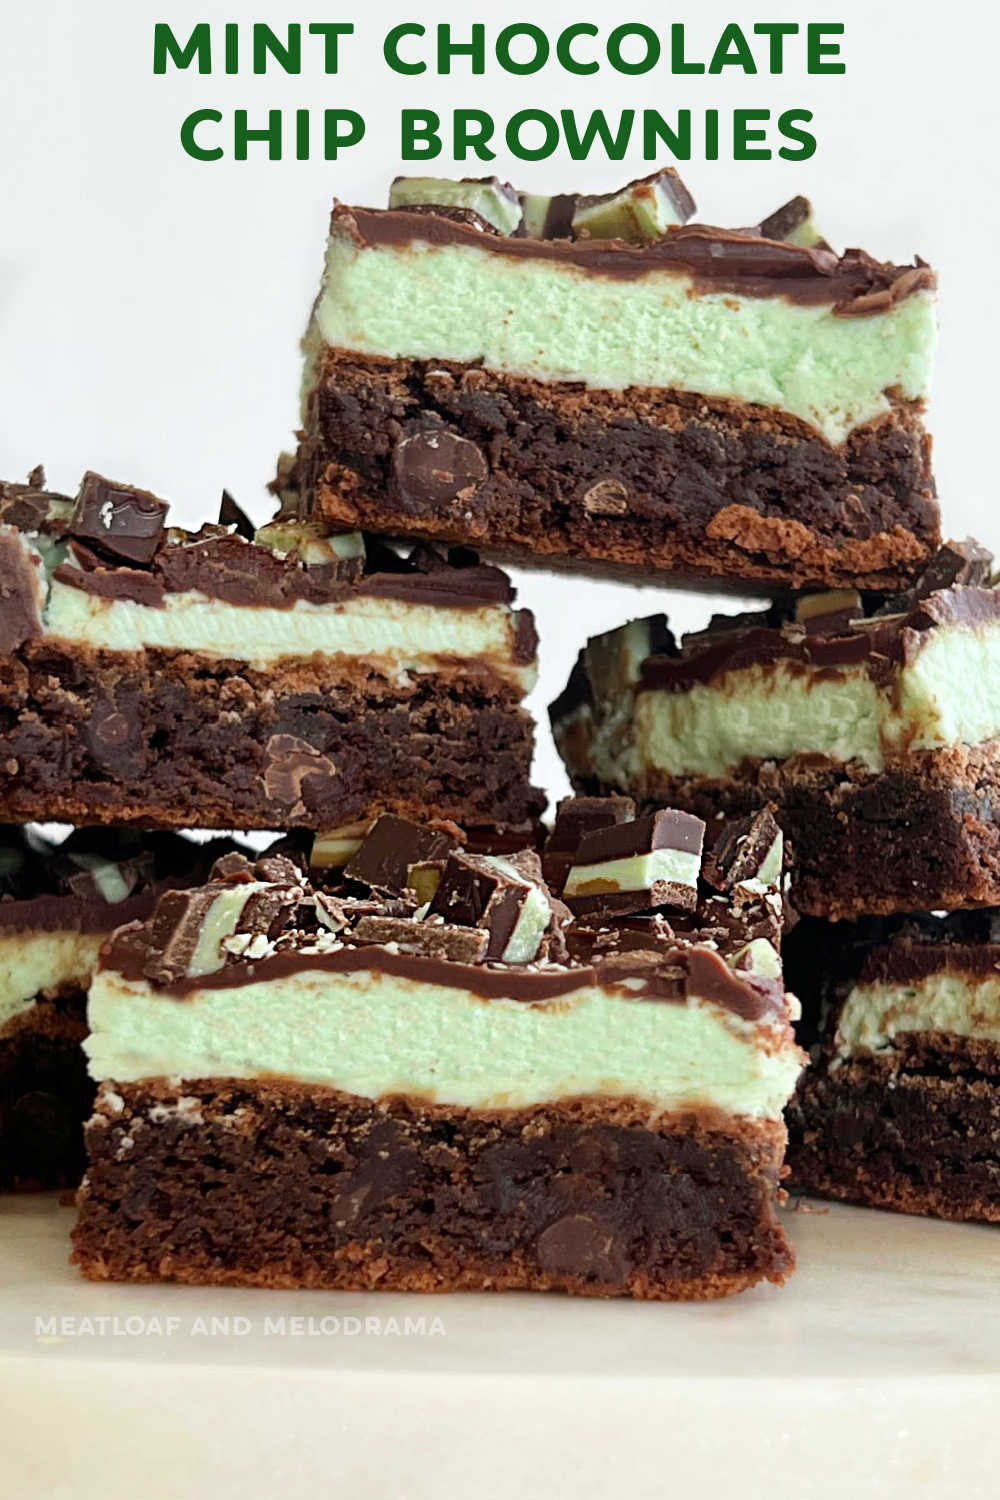 This Mint Chocolate Chip Brownies recipe is made with fudgy brownies topped with mint frosting and a thin layer of chocolate ganache. A delicious dessert for St. Patrick's Day or a sweet treat for the holidays! via @meamel